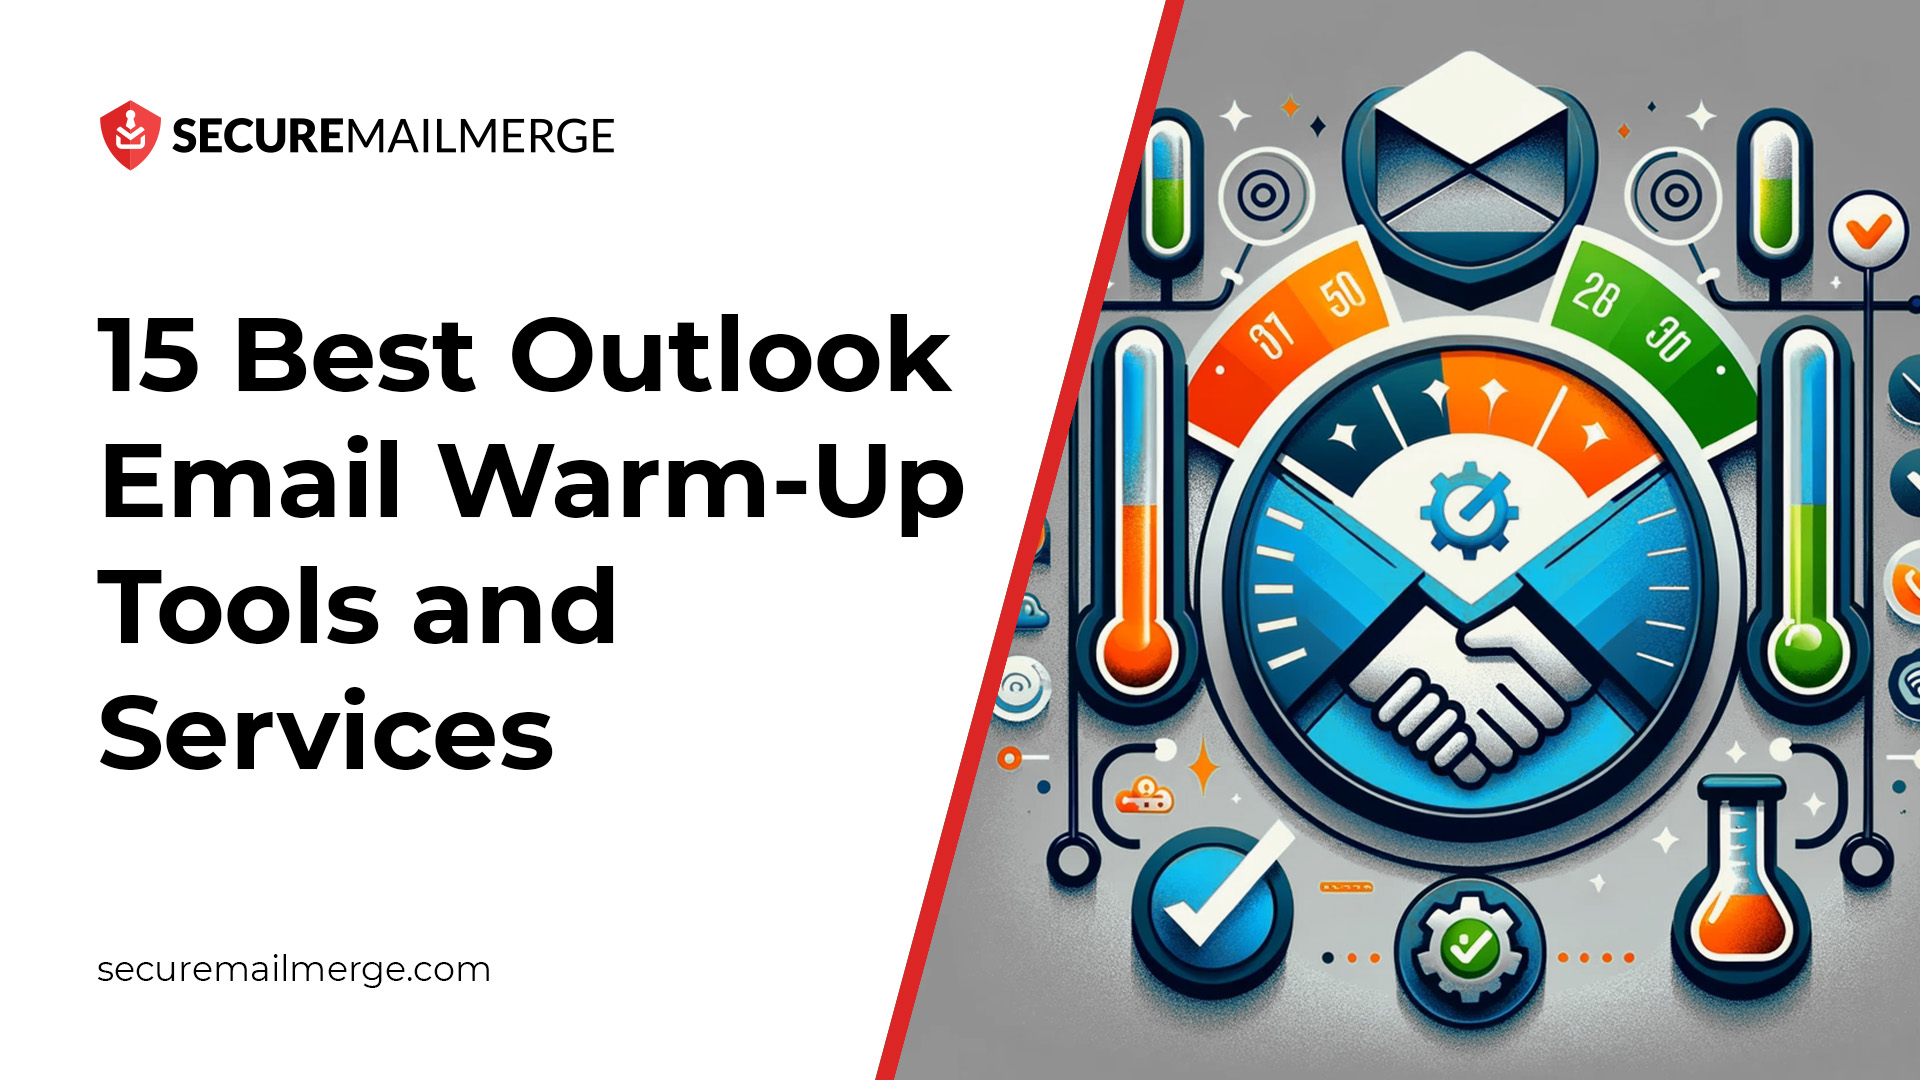 15 Best Outlook Email Warm-Up Tools and Services